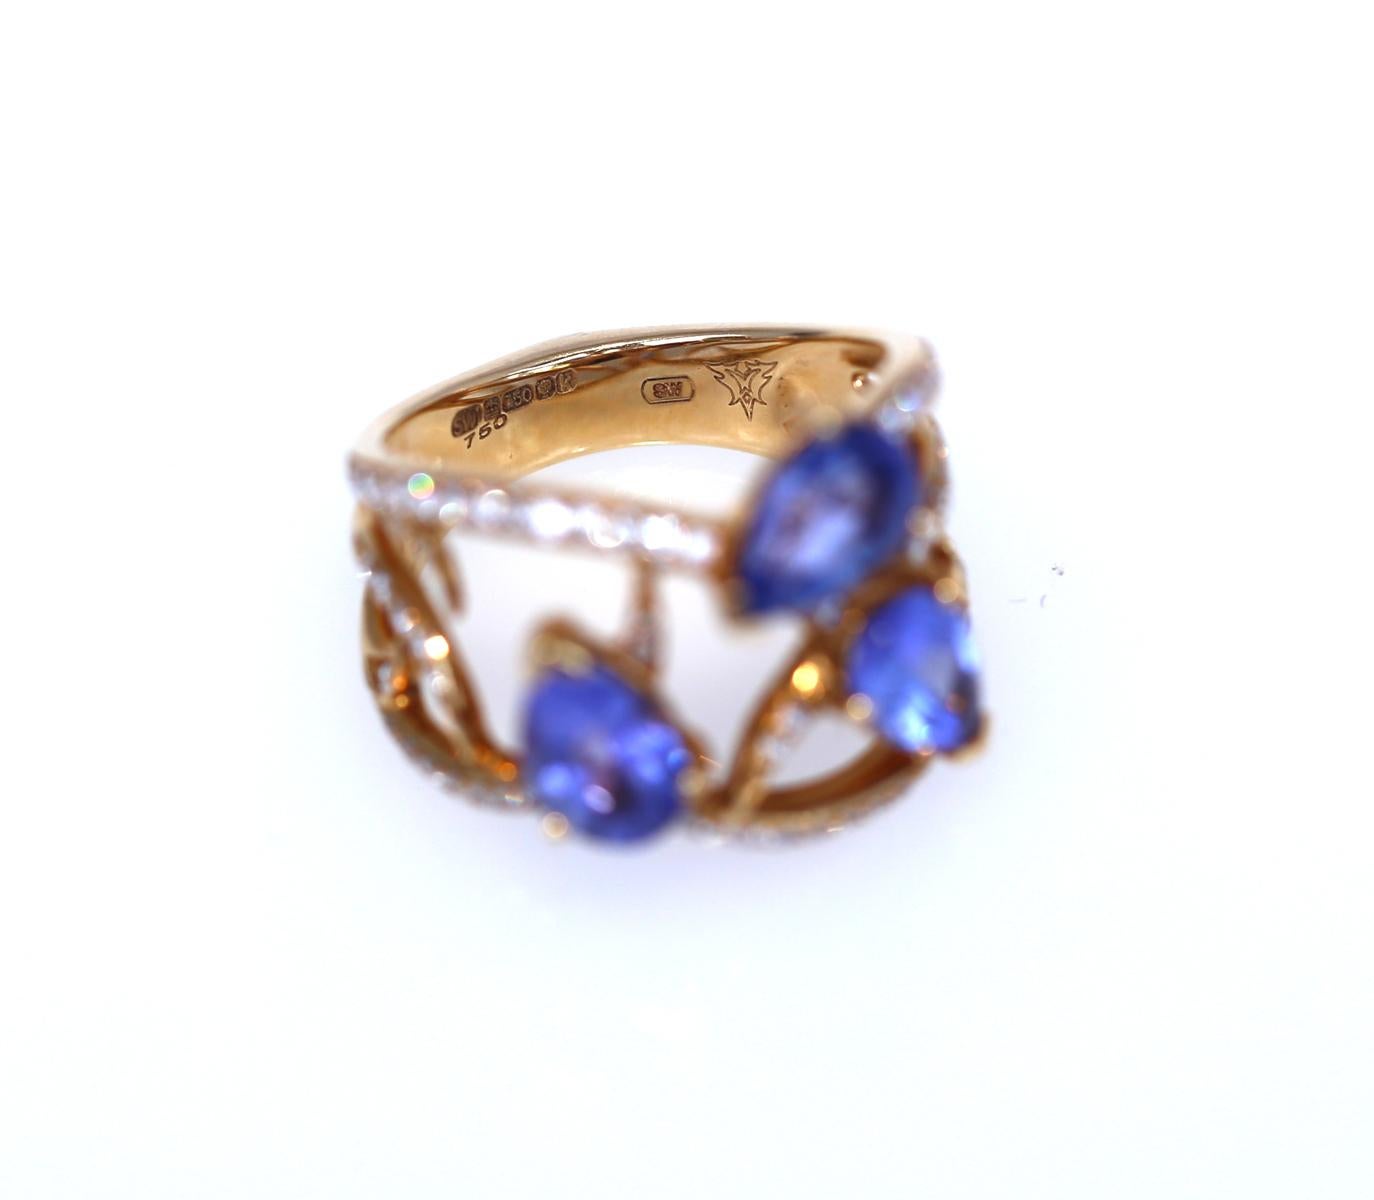 Women's Stephen Webster Tanzanite Diamonds Ring Signed Yellow Gold 18K, 2010 For Sale